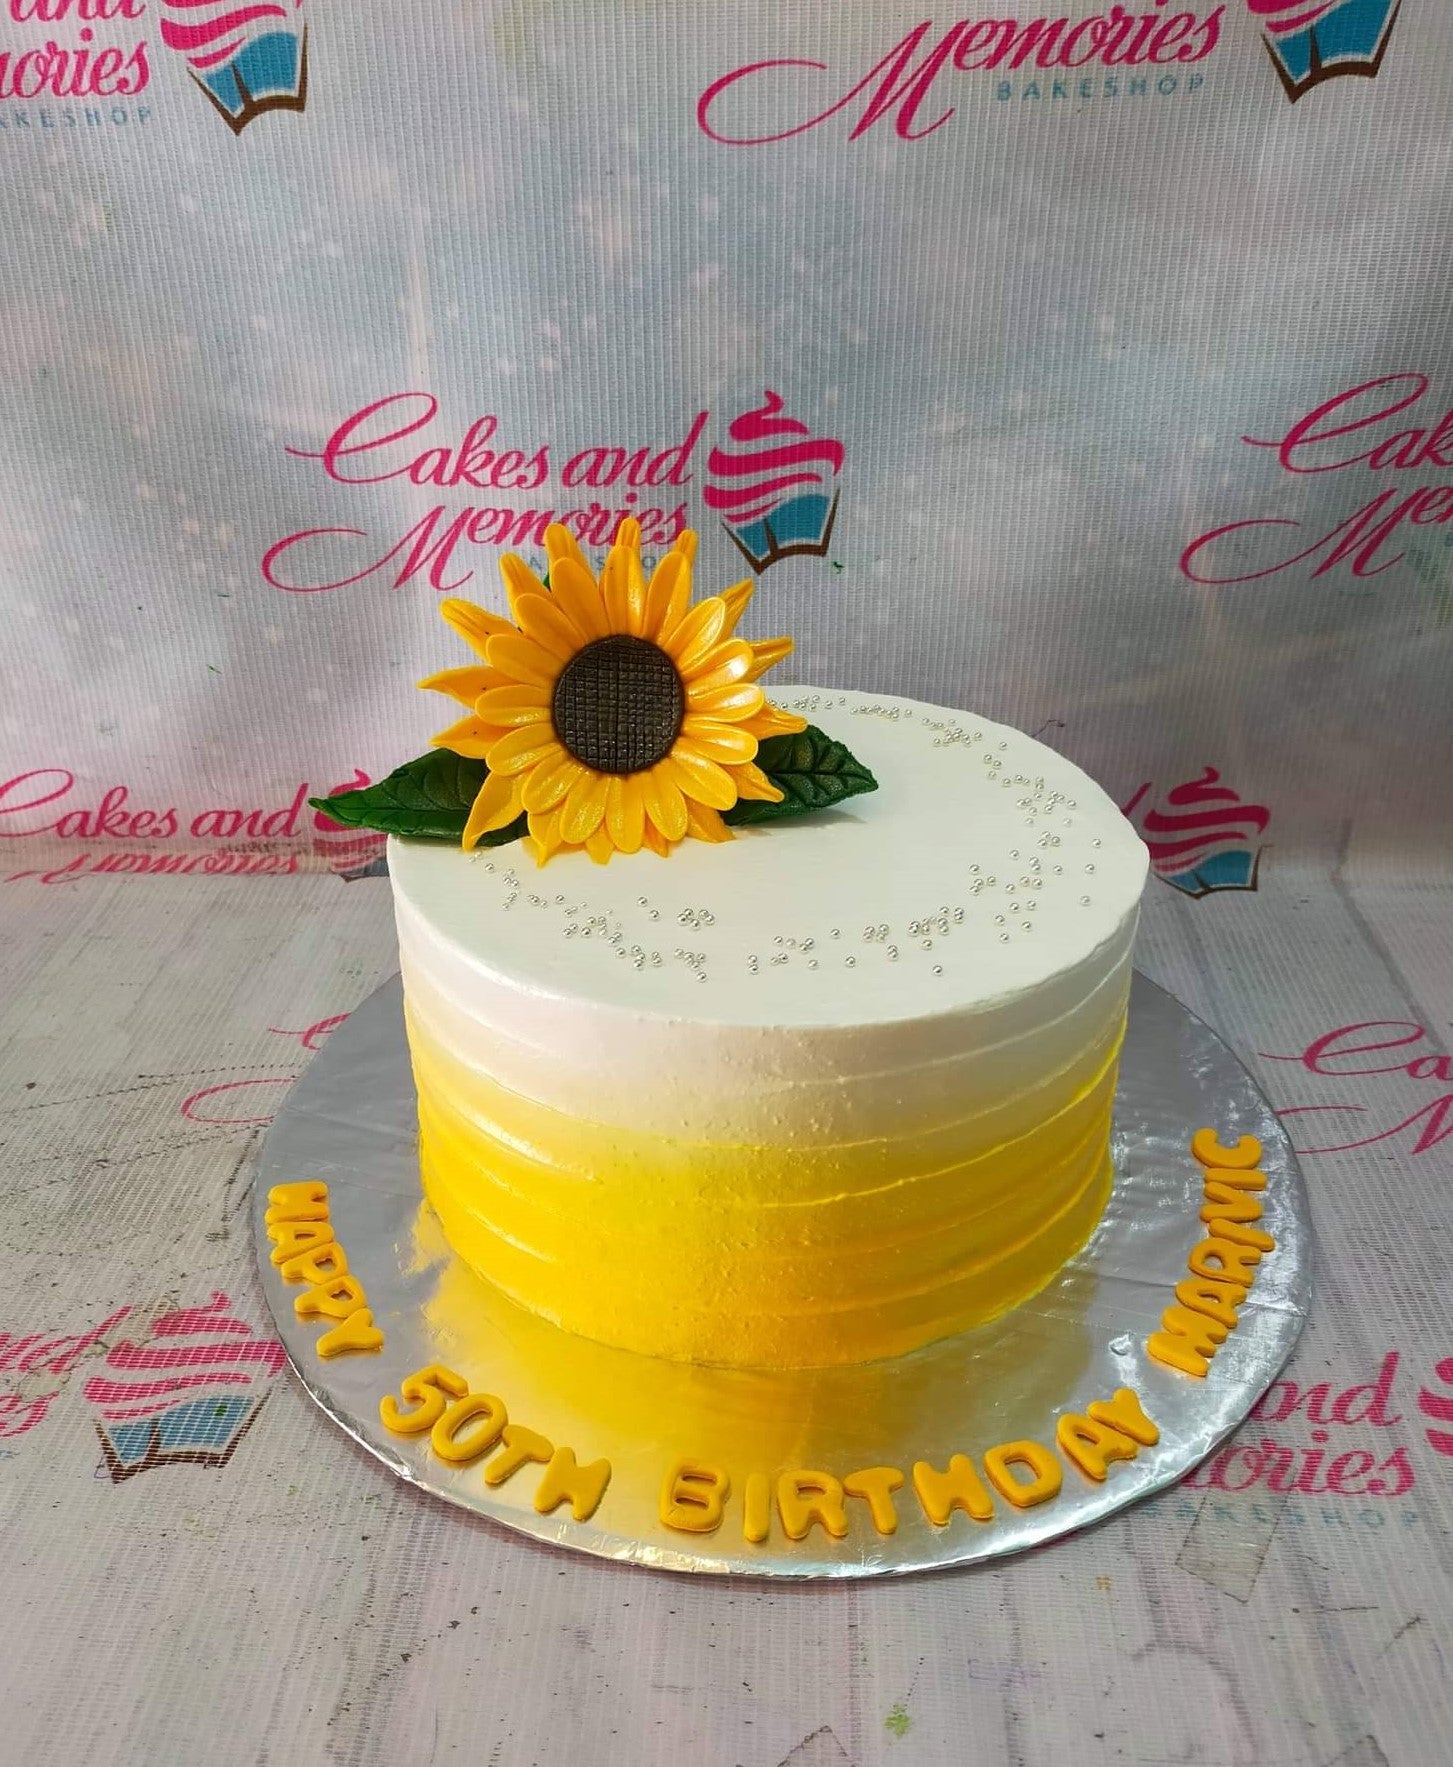 Add This Basic Yellow Cake Recipe To Your Recipe Box - Sweet Party Place